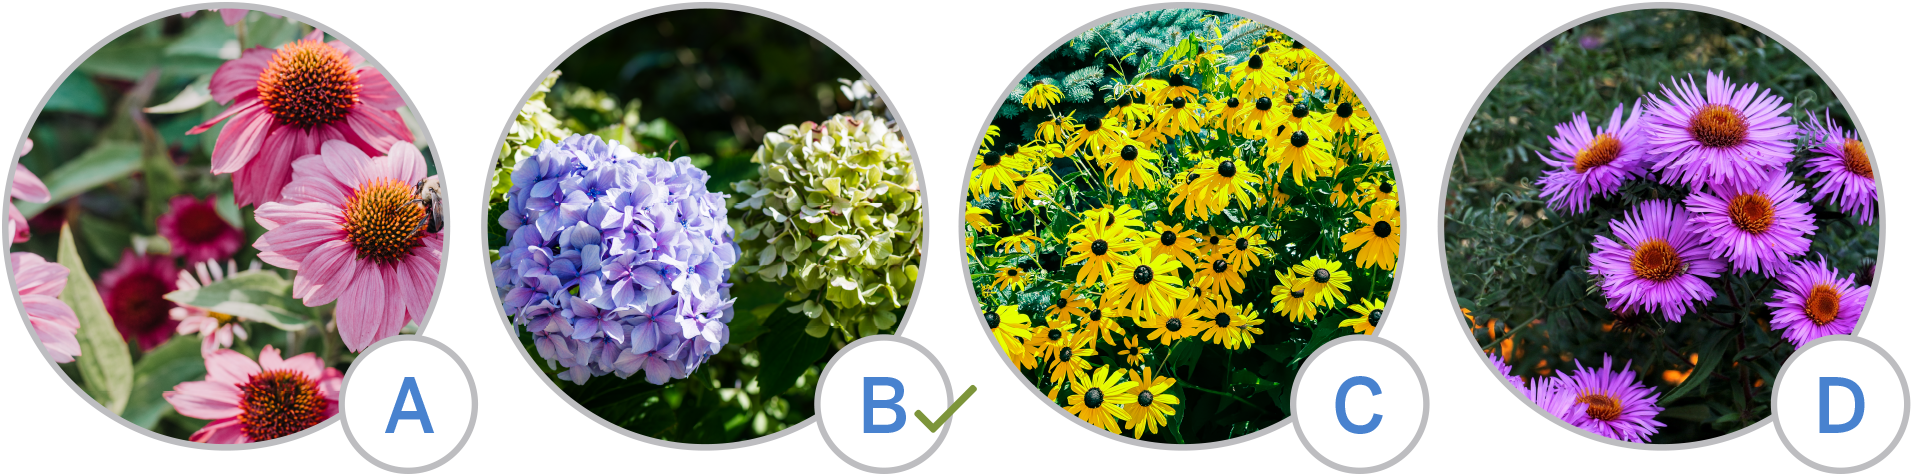 Different types of flower choices